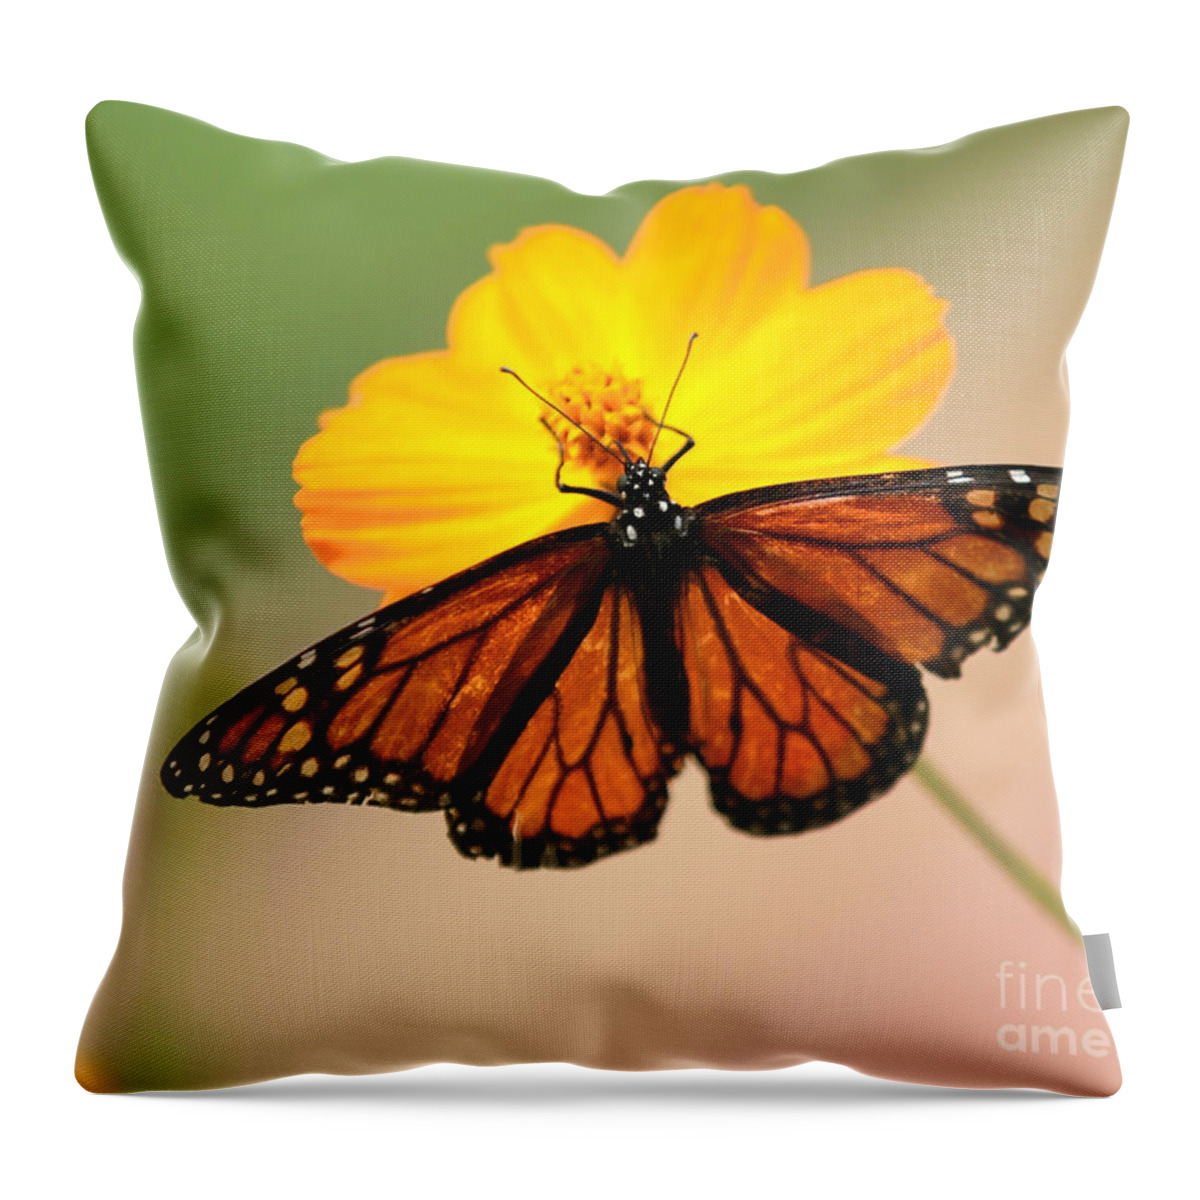 Angelic Throw Pillow featuring the photograph Like Stained Glass by Sabrina L Ryan